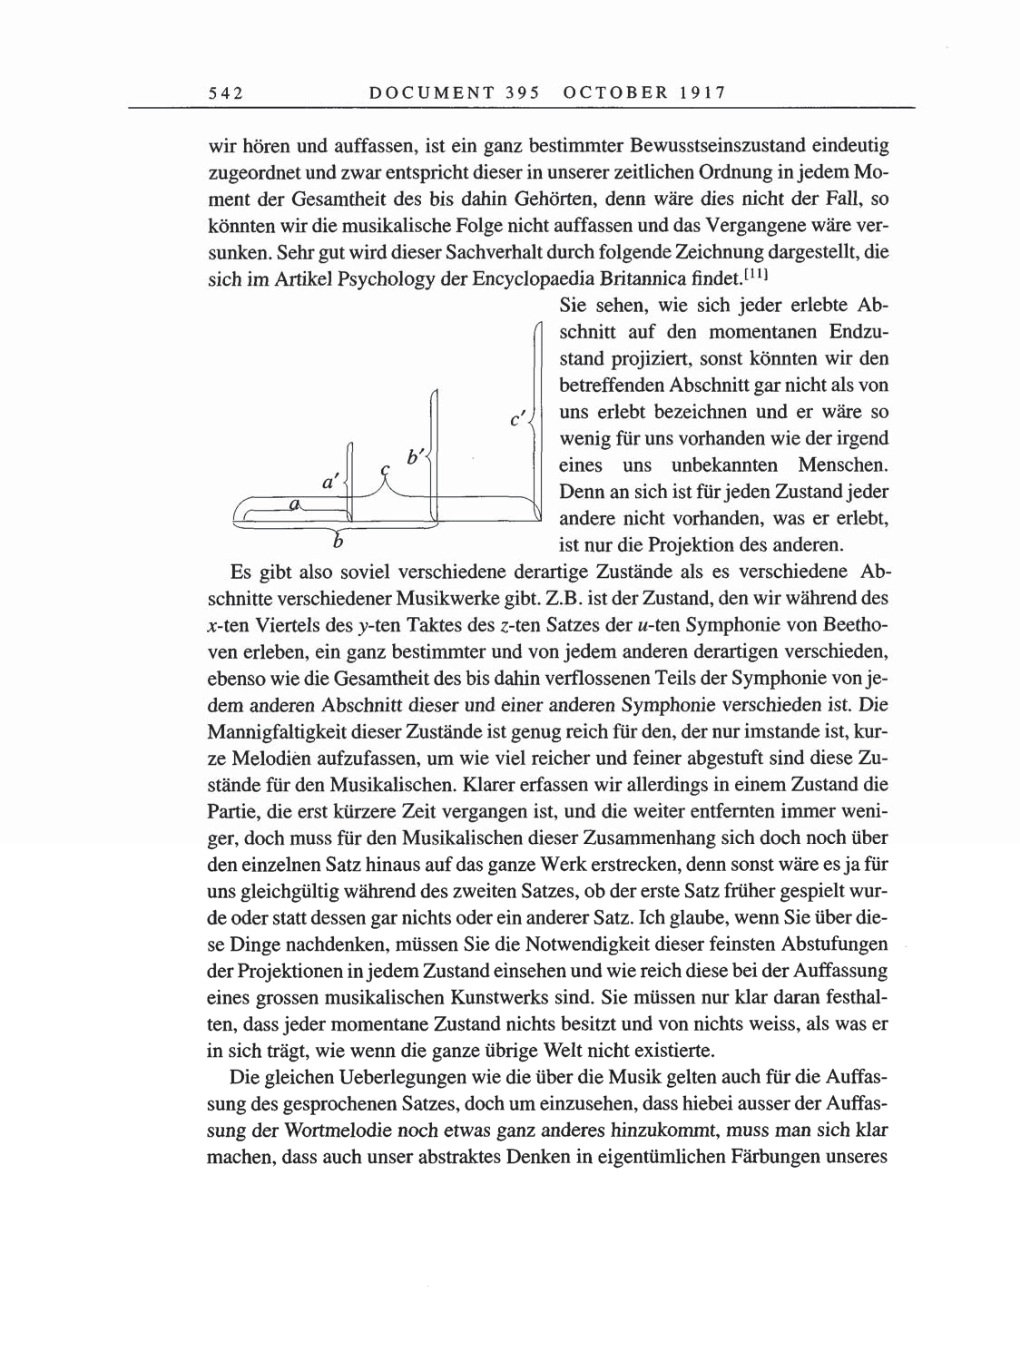 Volume 8, Part A: The Berlin Years: Correspondence 1914-1917 page 542